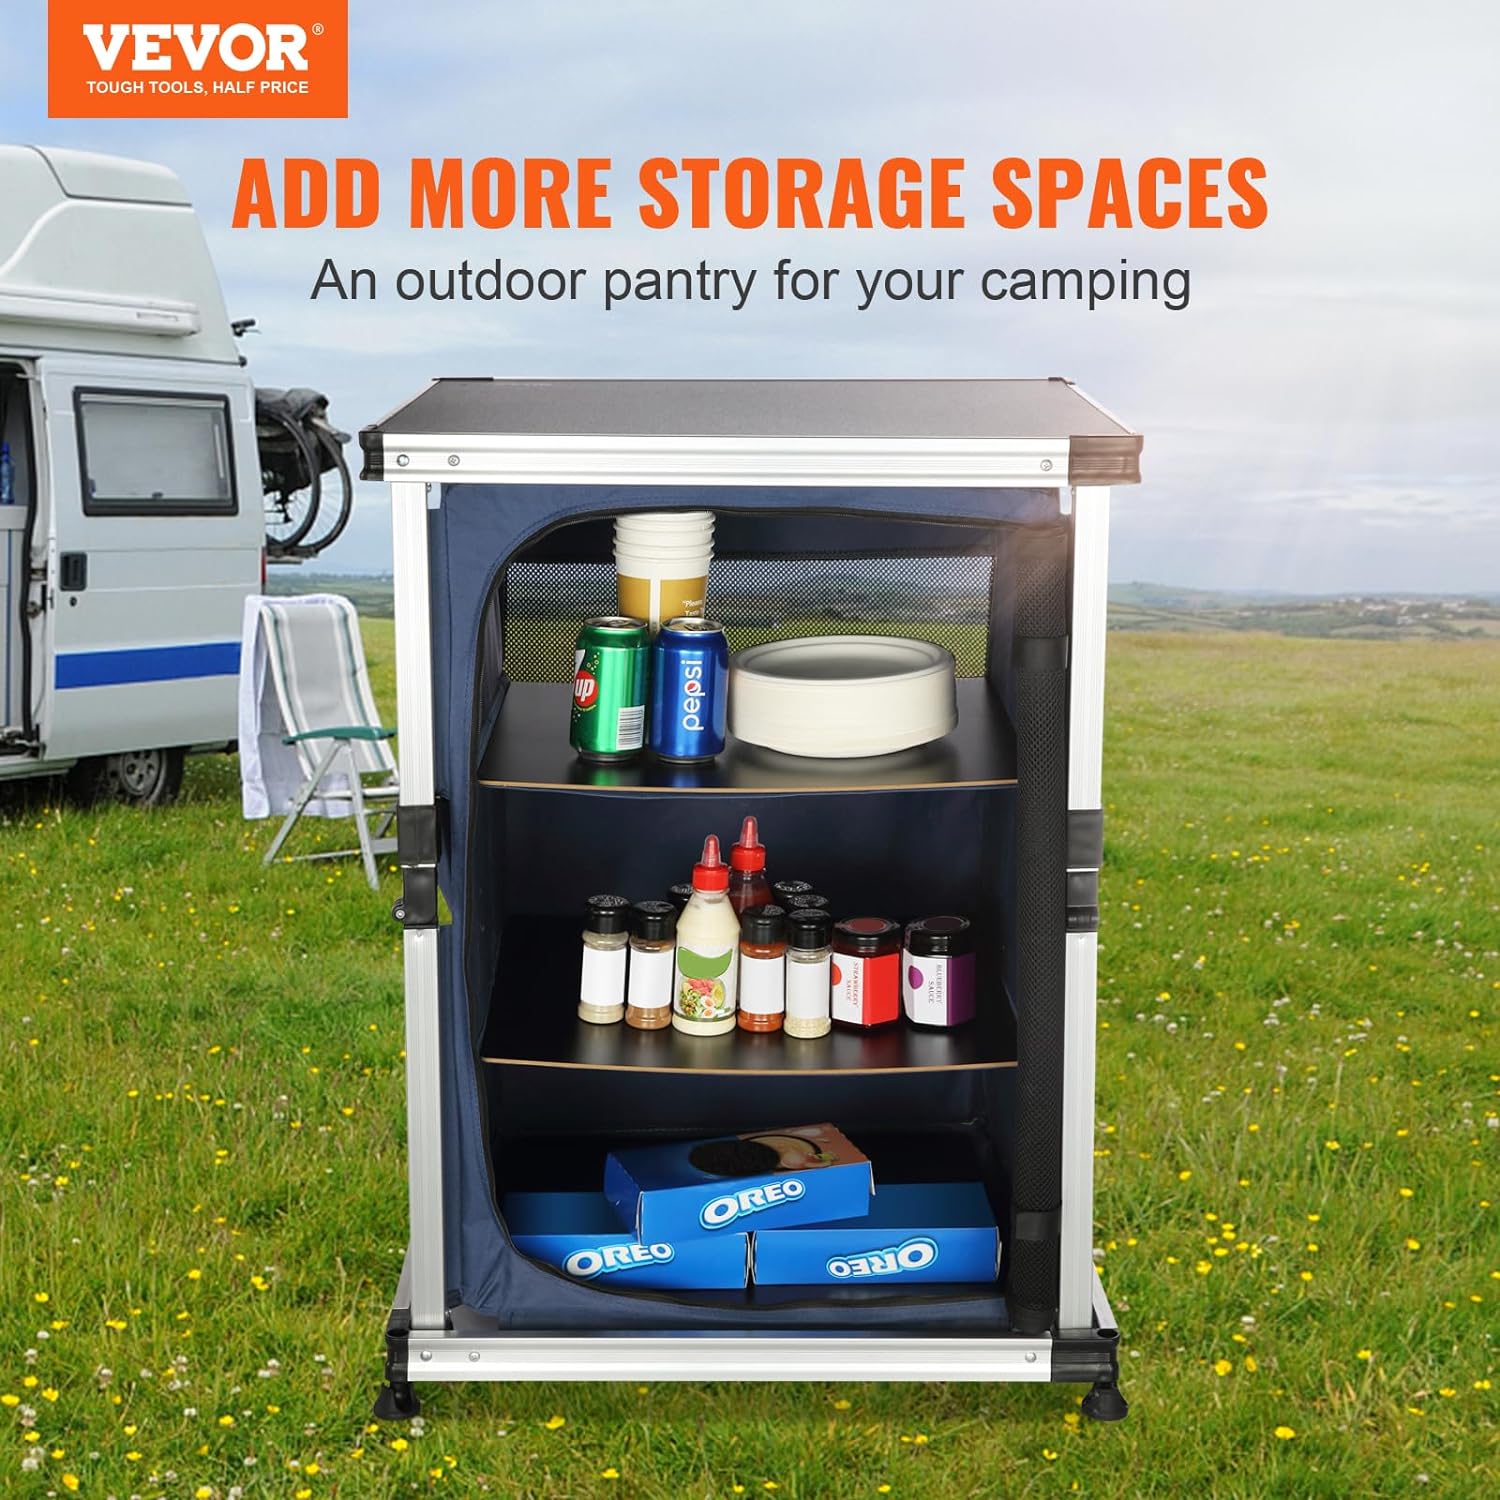 VEVOR Camping Kitchen Table, Lightweight Portable Folding Outdoor Cooking Storage Cabinet with 3-Tier Shelves, Side Pockets & Carrying Bag, Easy Set-up for Picnics, BBQ, RV Traveling